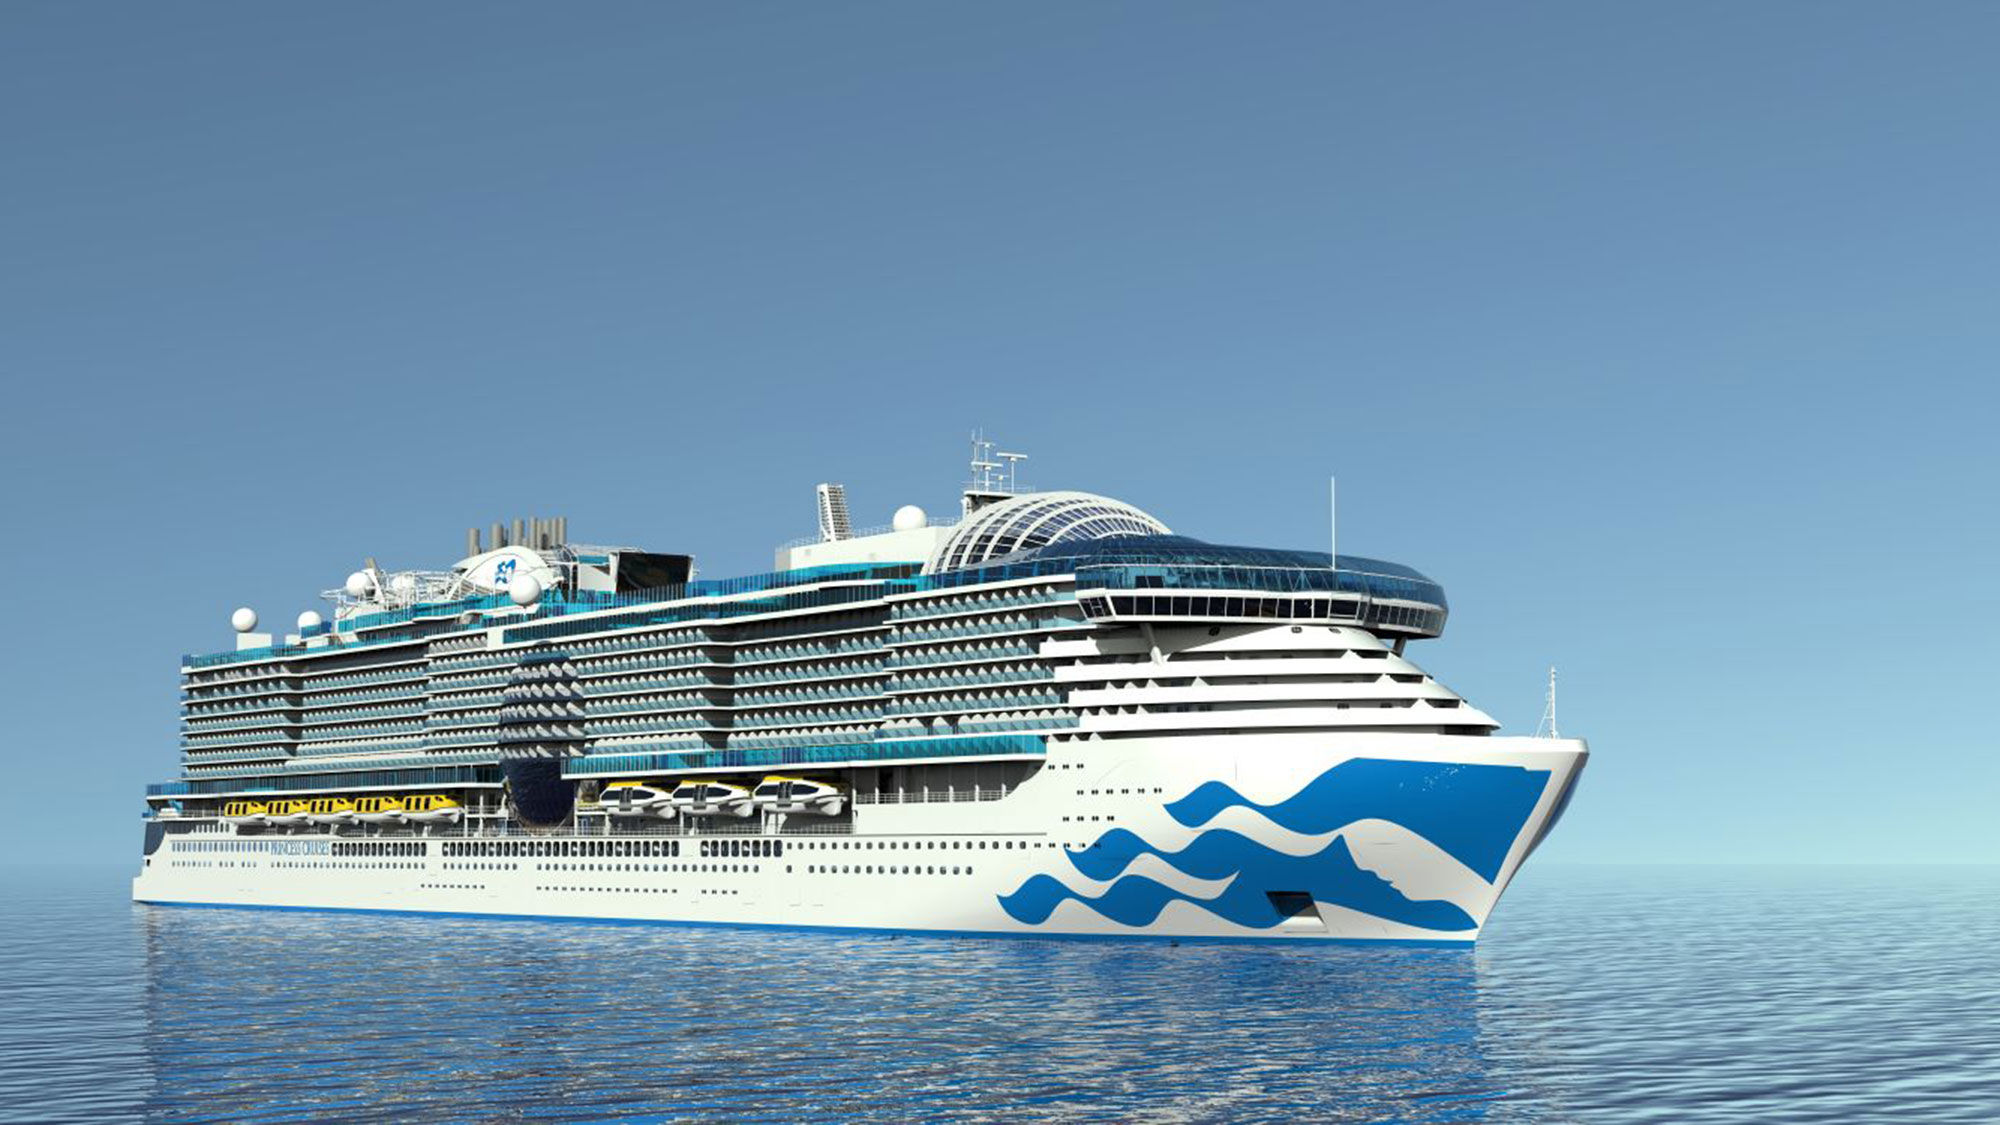 The Sun Princess will sail Caribbean cruises from Fort Lauderdale in its first winter season.